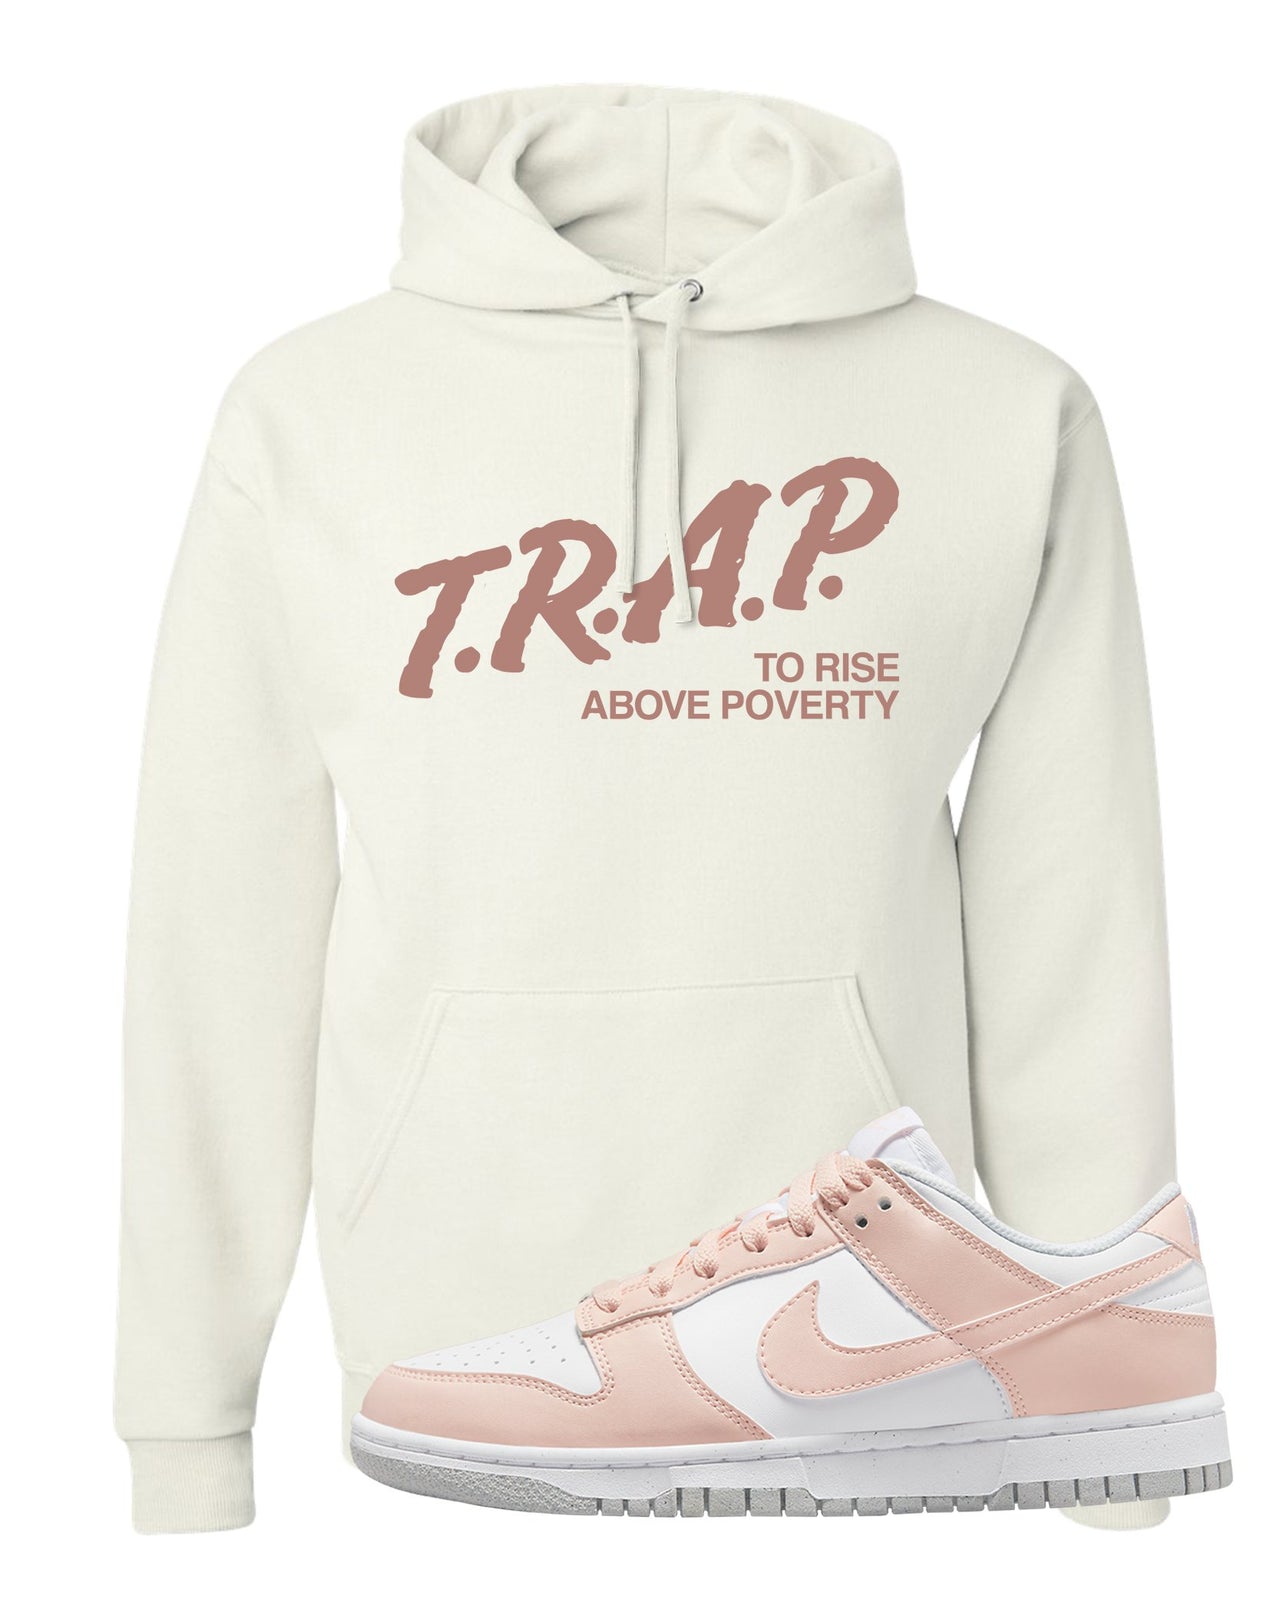 Next Nature Pale Citrus Low Dunks Hoodie | Trap To Rise Above Poverty, White